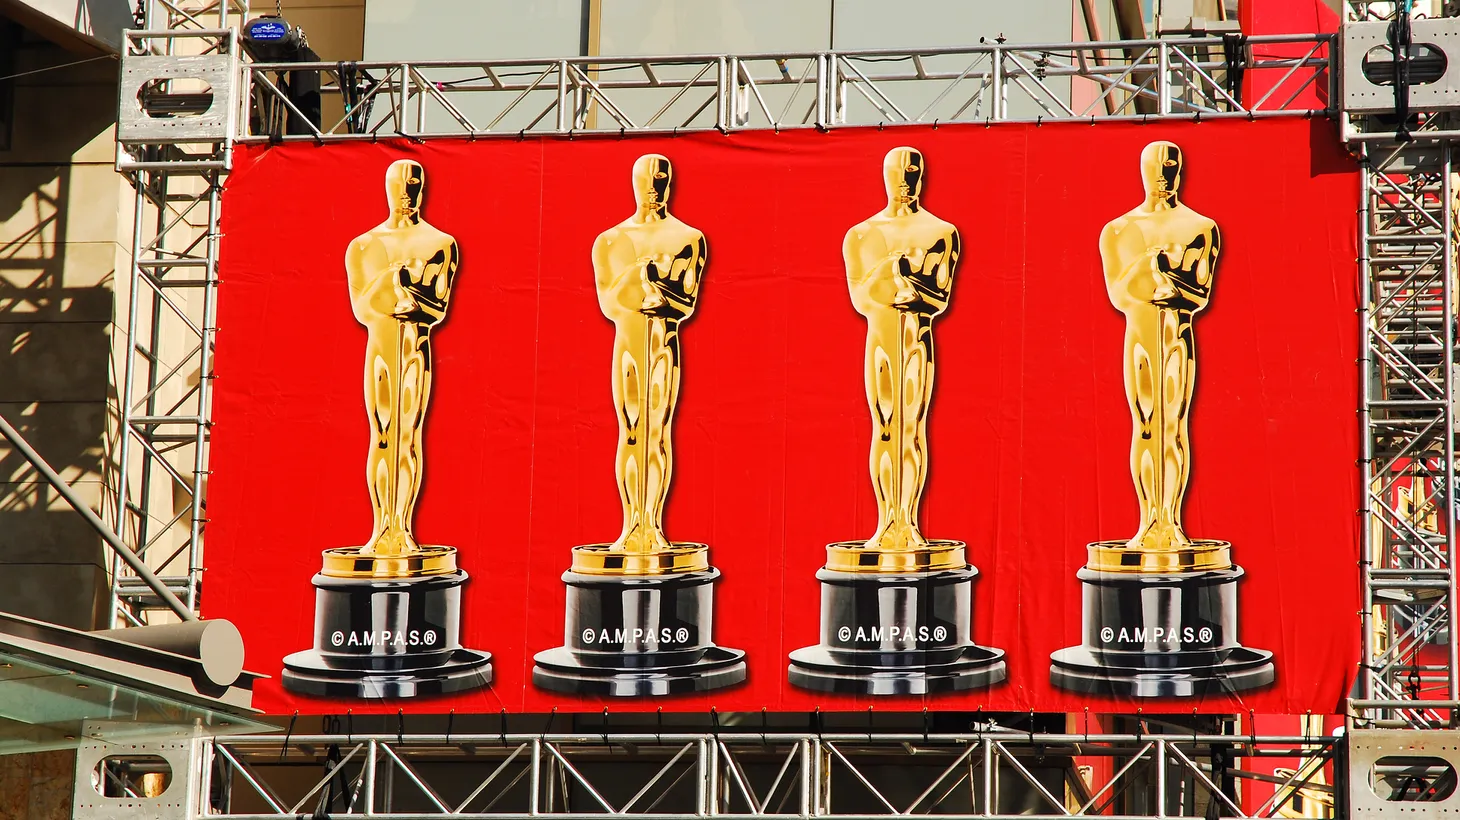 A banner highlighting the Oscars hangs along Hollywood Boulevard in Los Angeles, California.